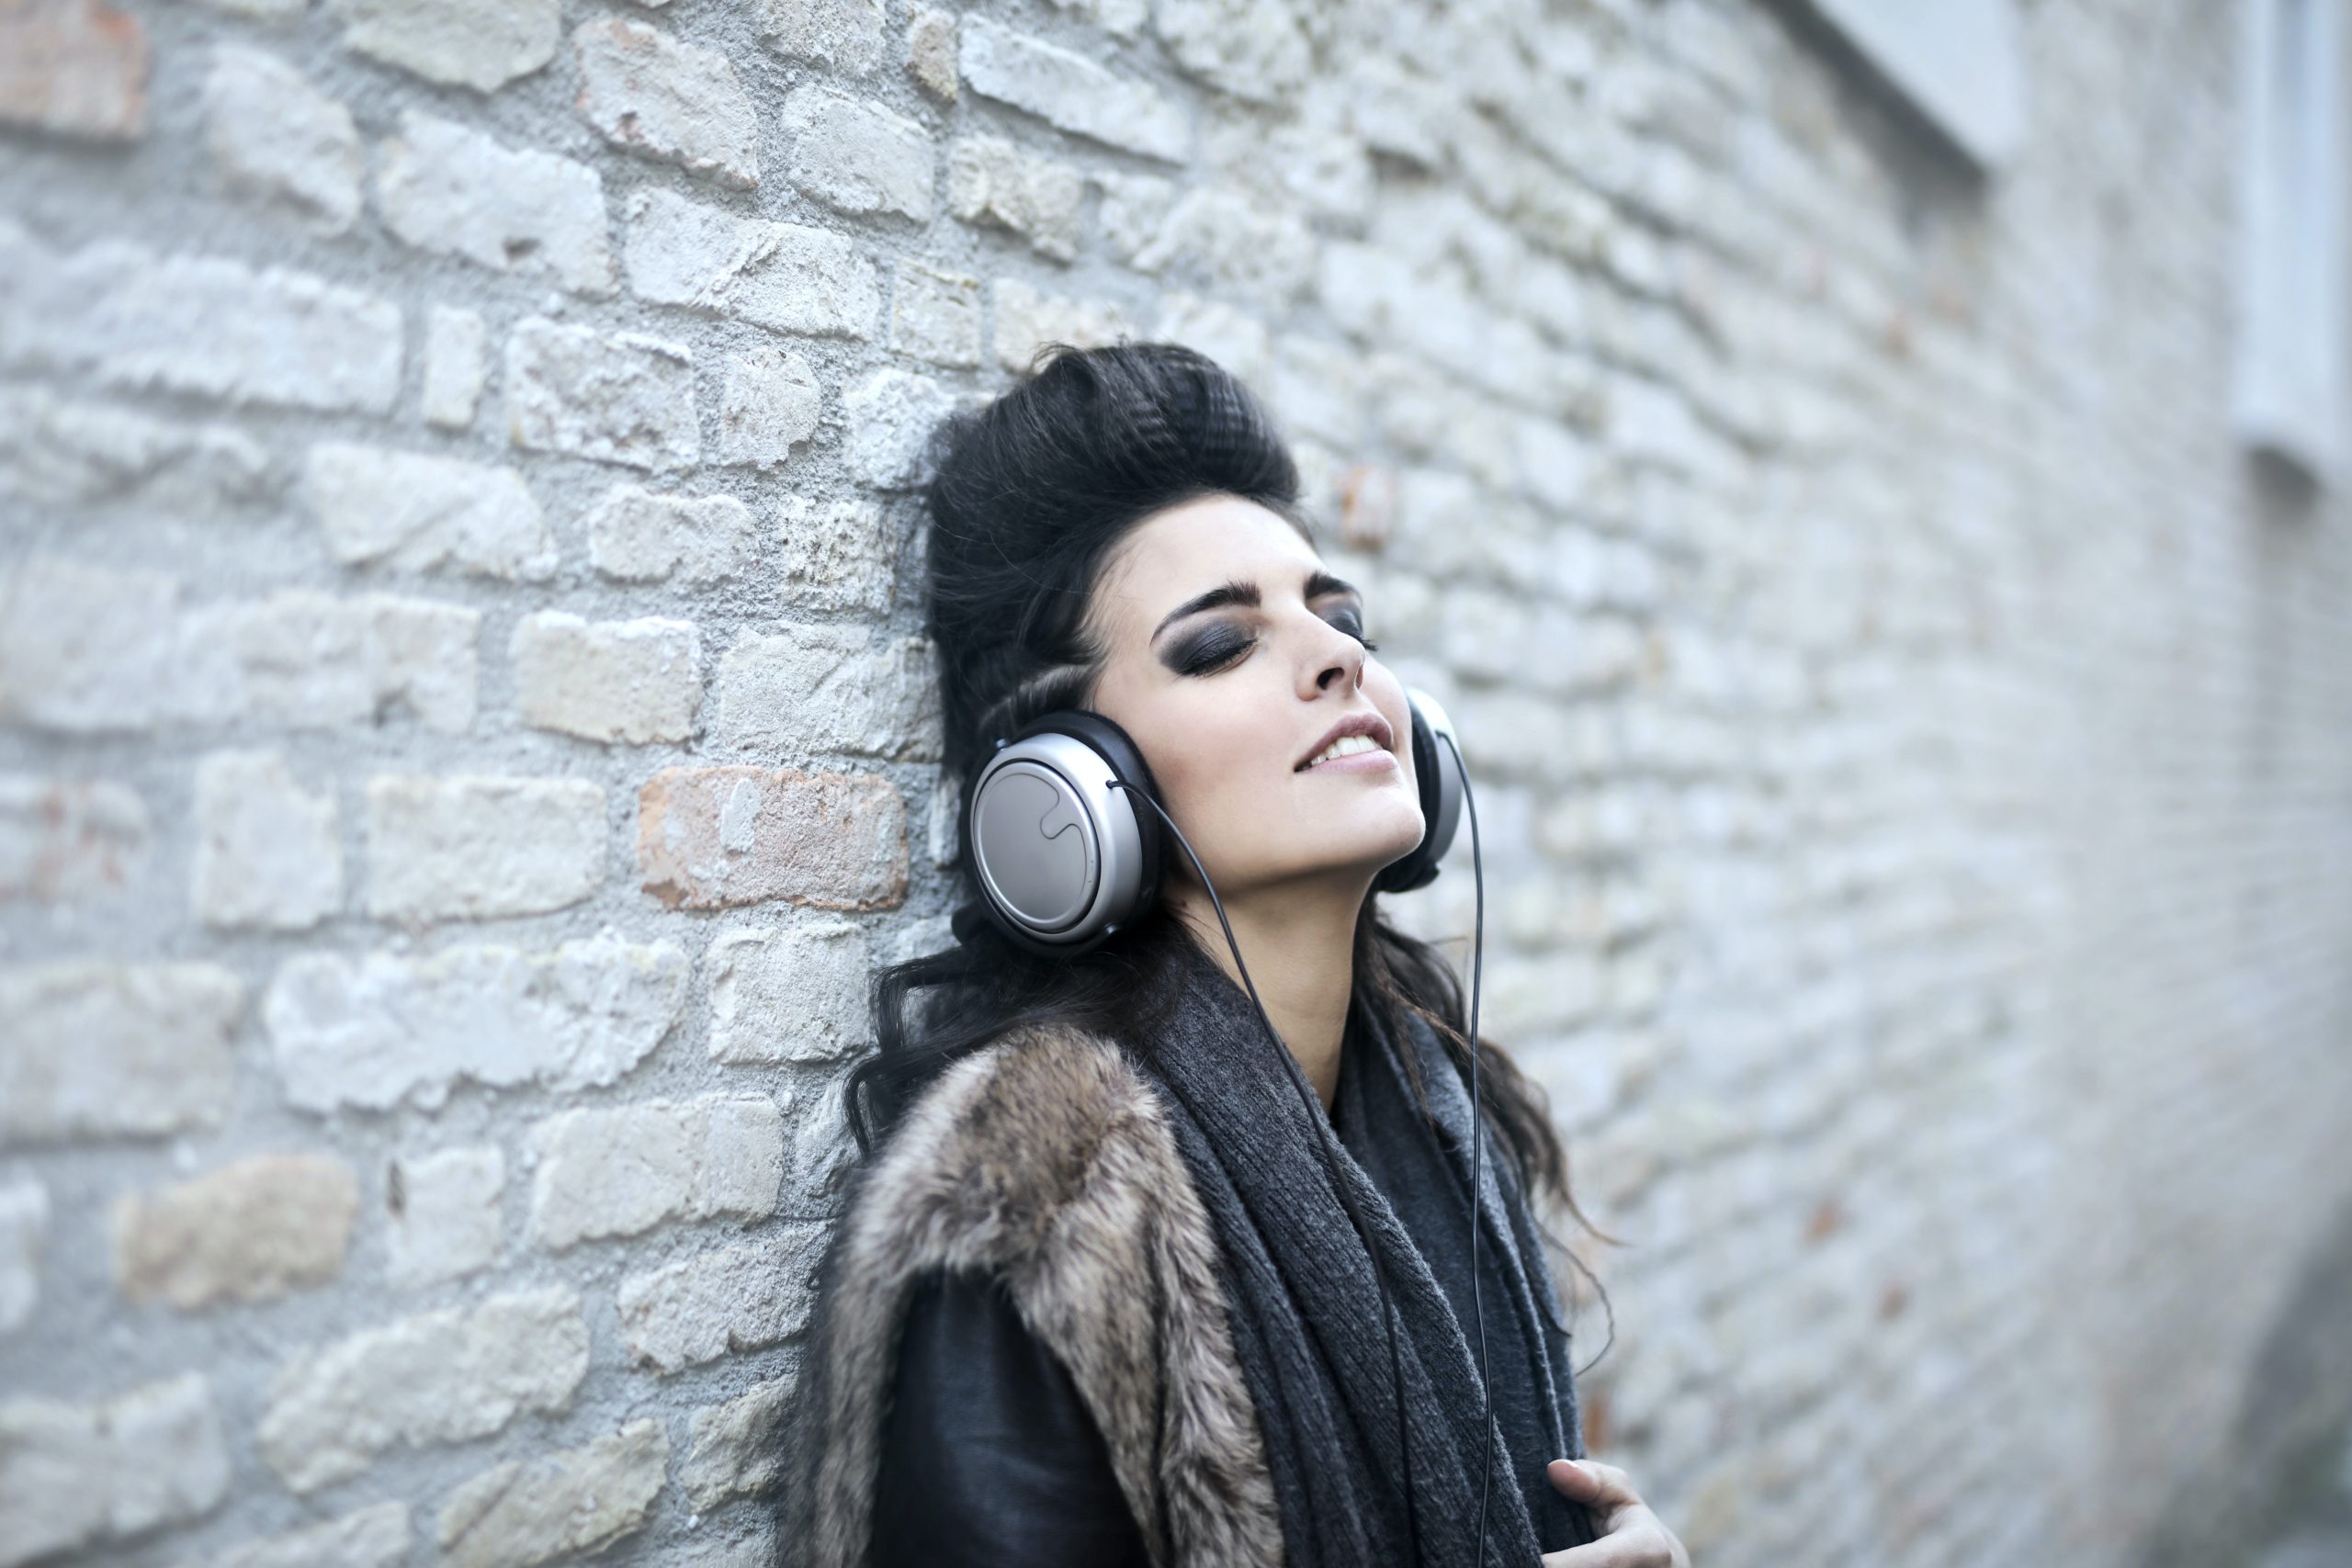 Informal young woman listening to music near grunge wall